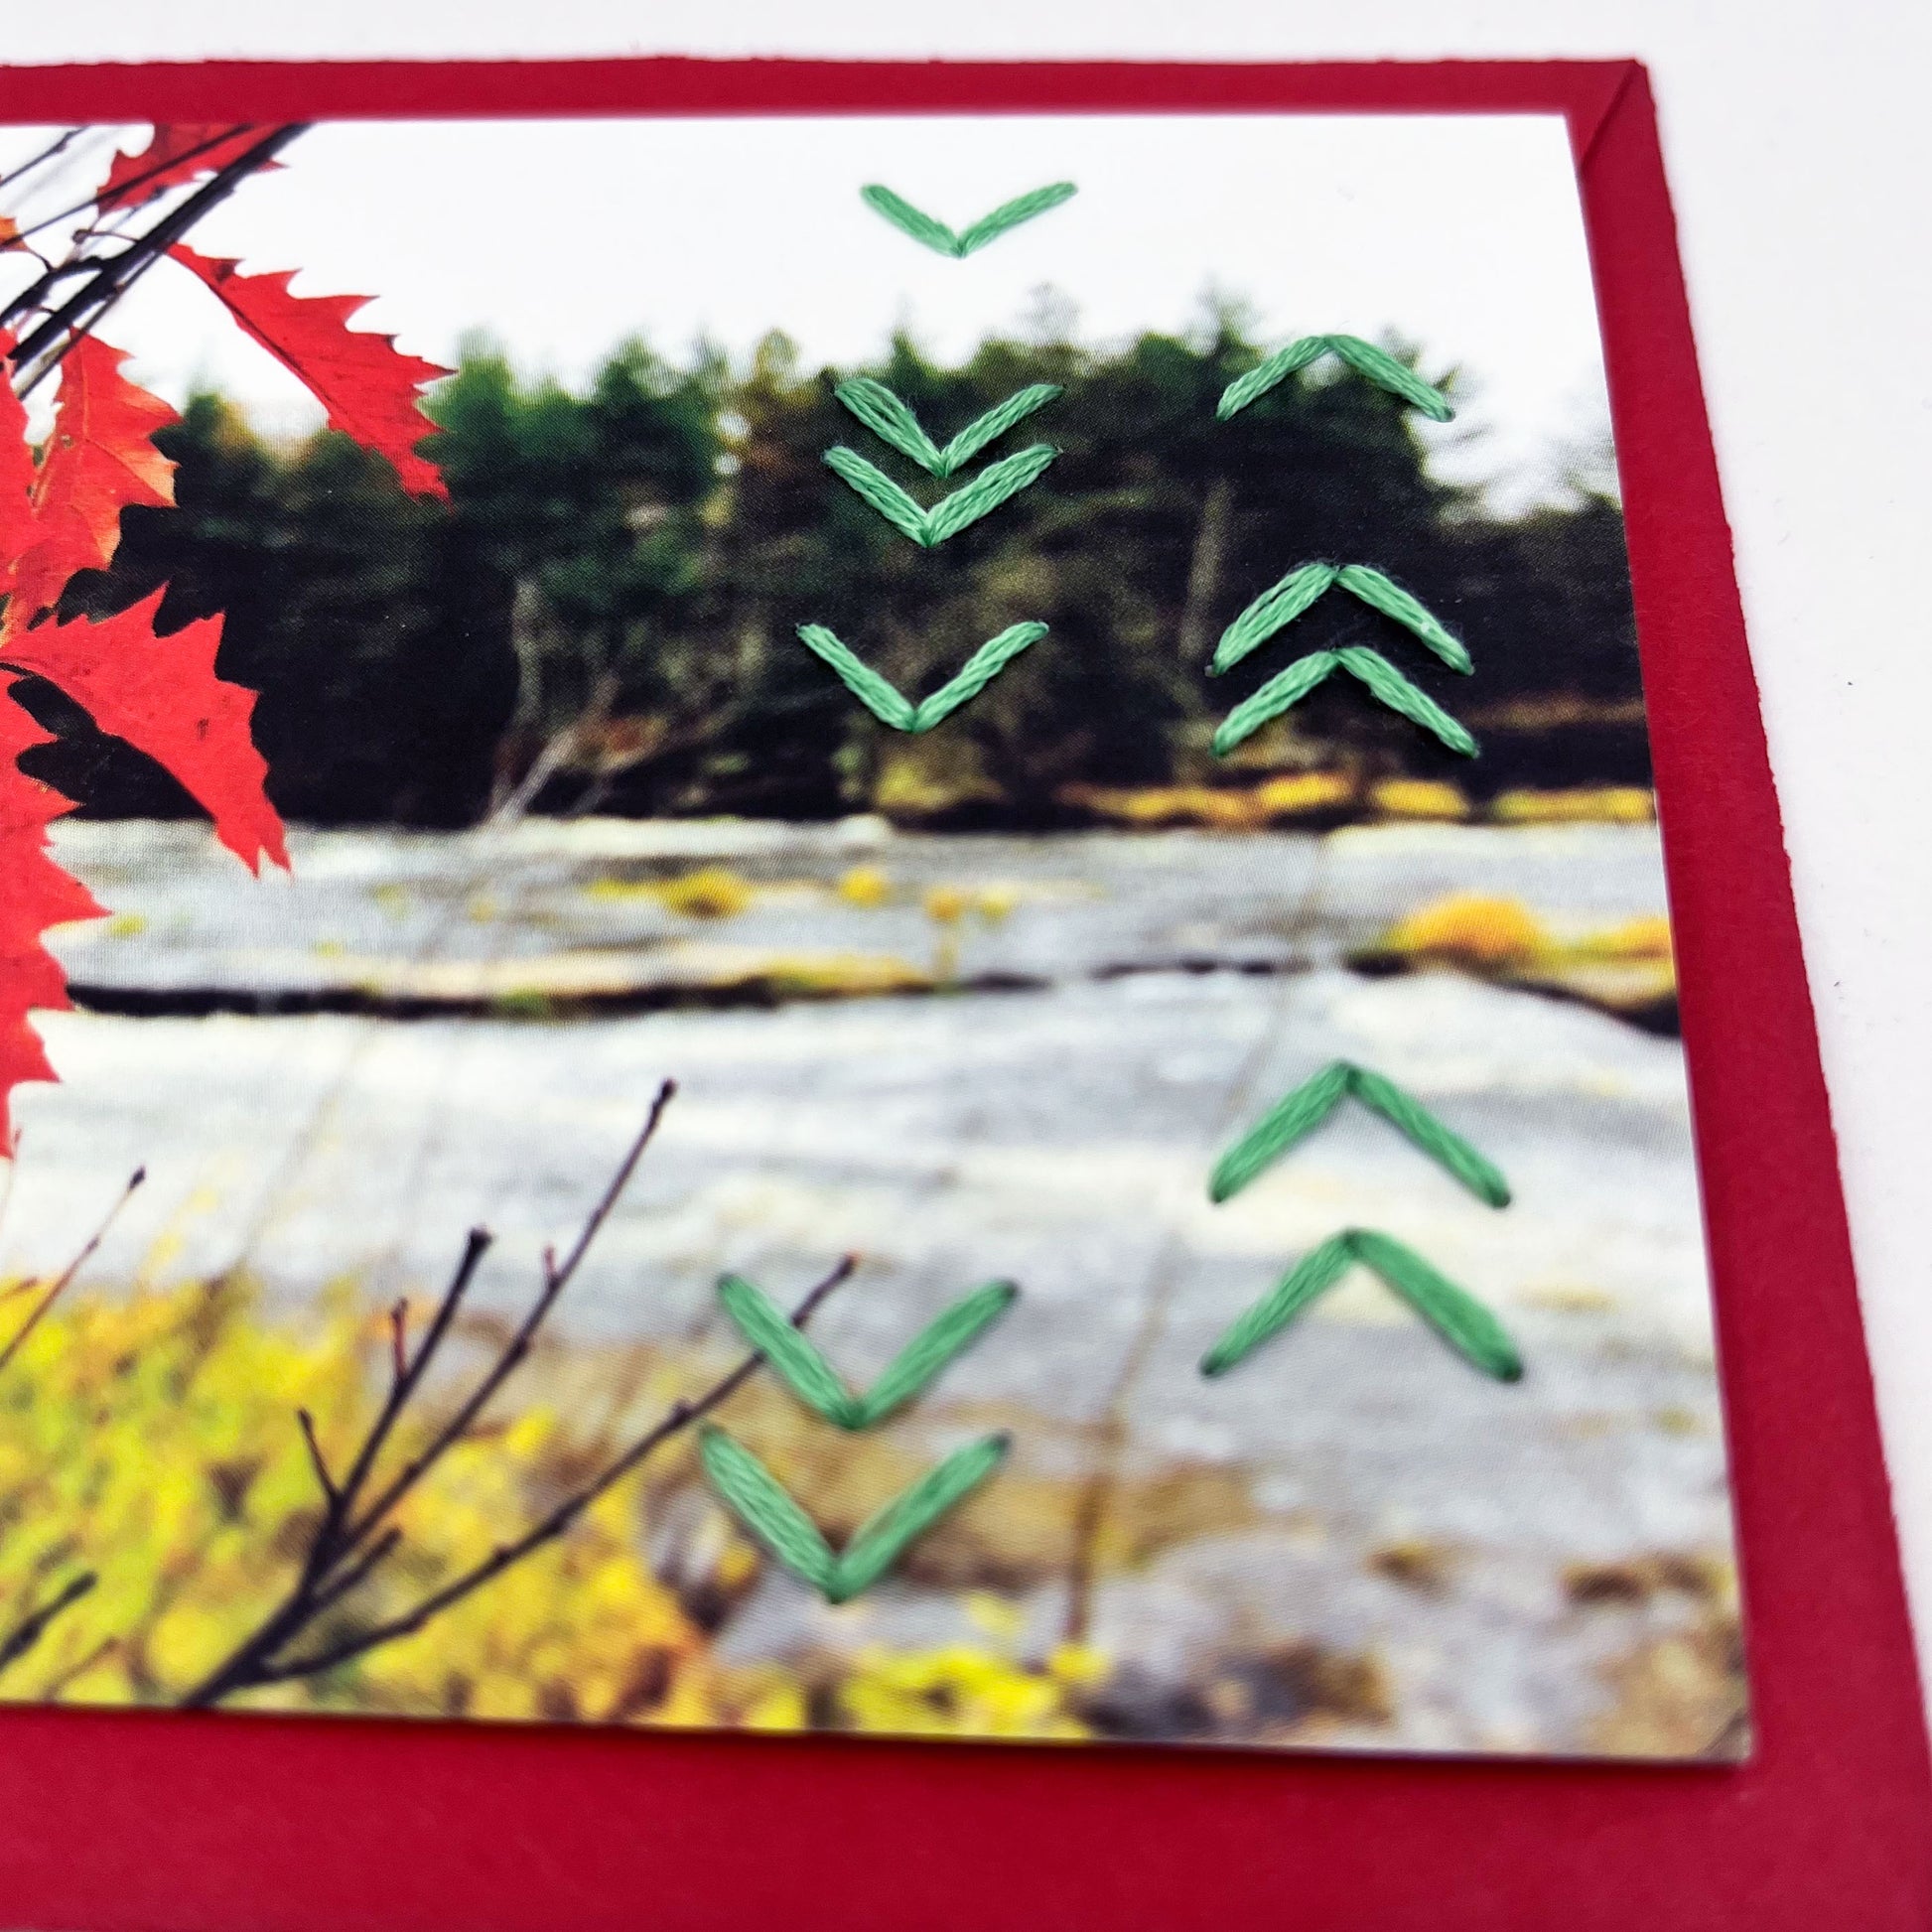 Greeting card flat on an envelope. Photo of red leaves. Rows of green chevron stitches along right side card